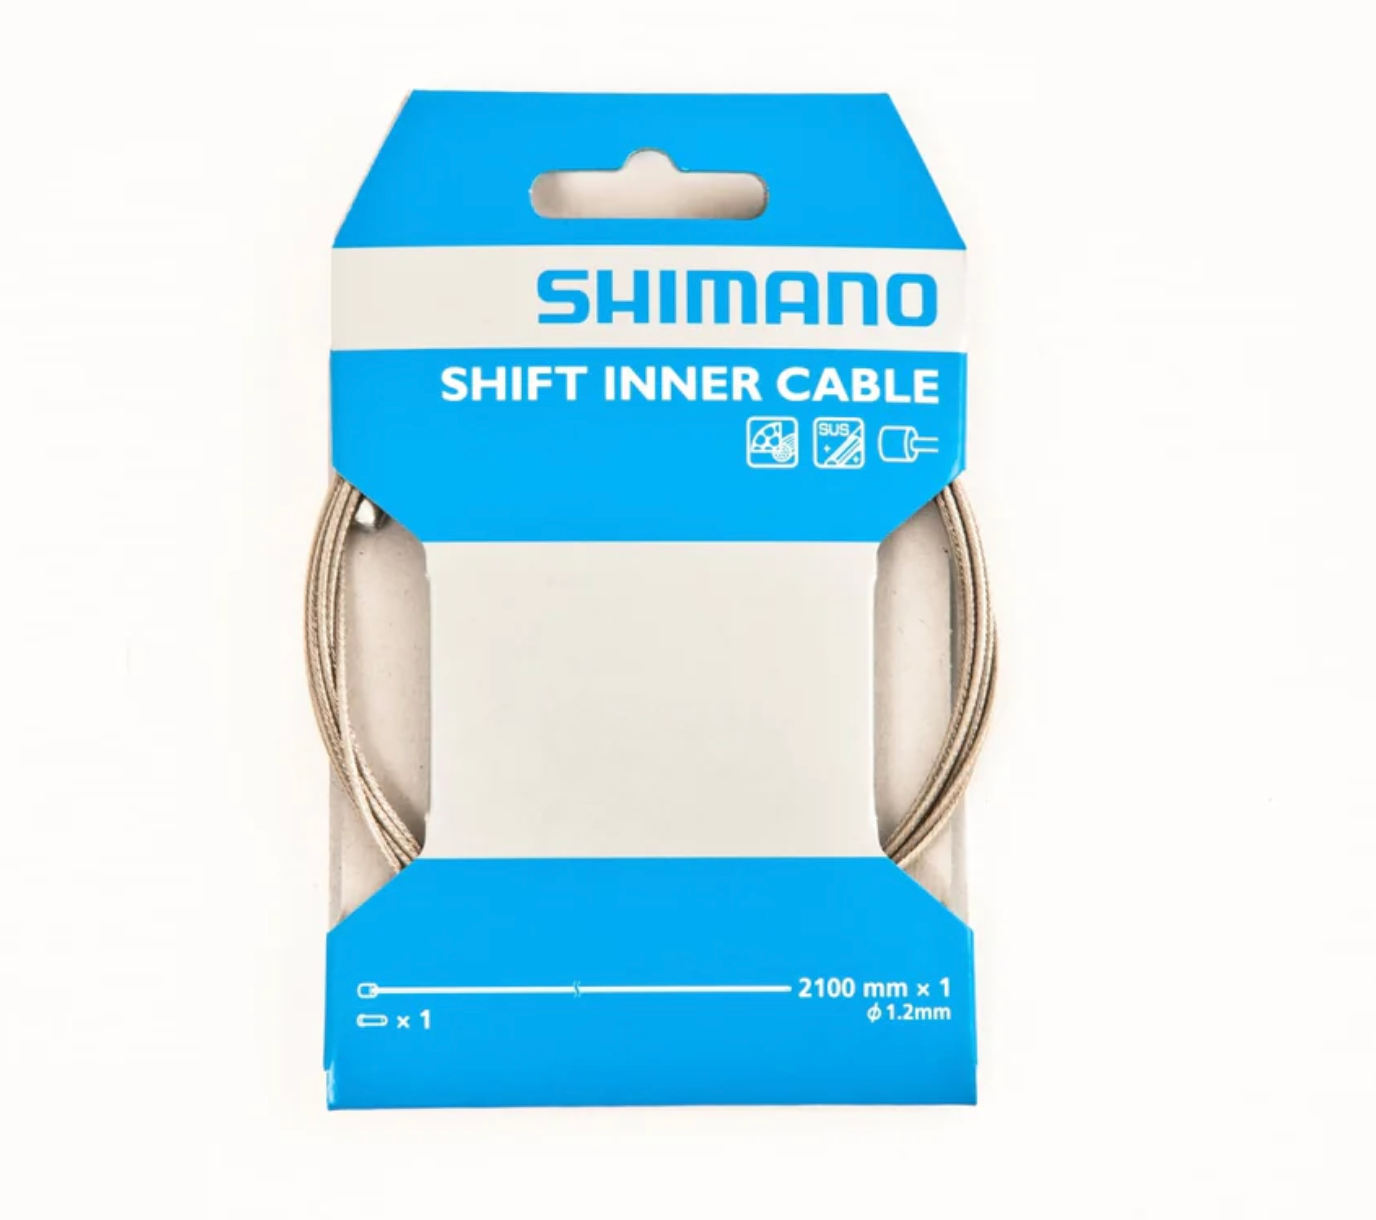 Shimano Sus Shift Inner Cable 2100mm x 1 set image #1